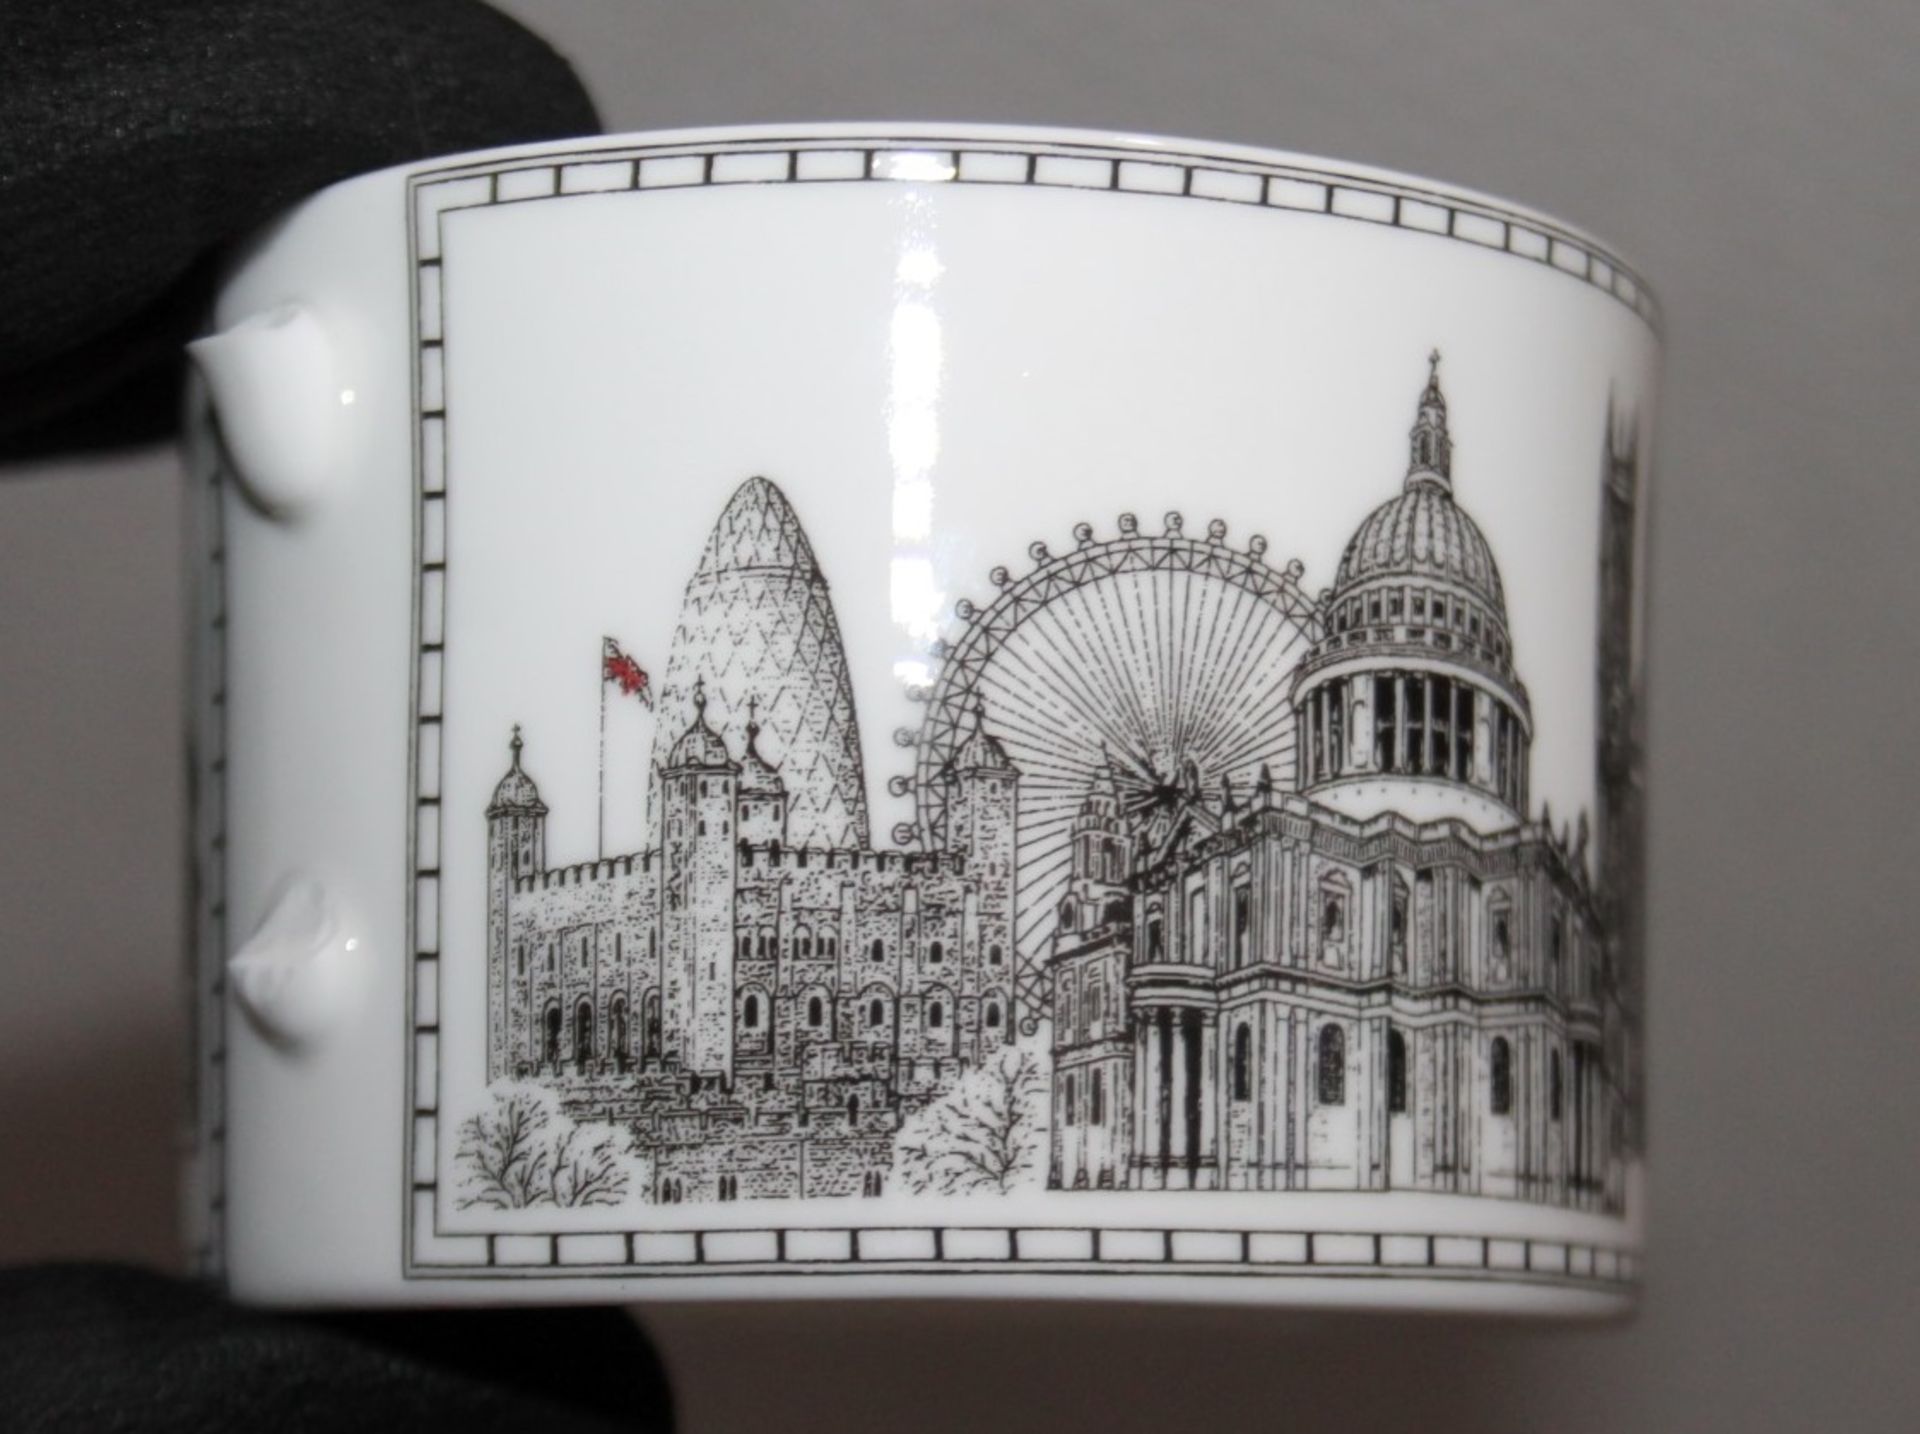 1 x HALCYON DAYS 'London Icons' Bone China Teacup & Saucer - Original Price £79.95 - Read Condition - Image 7 of 10